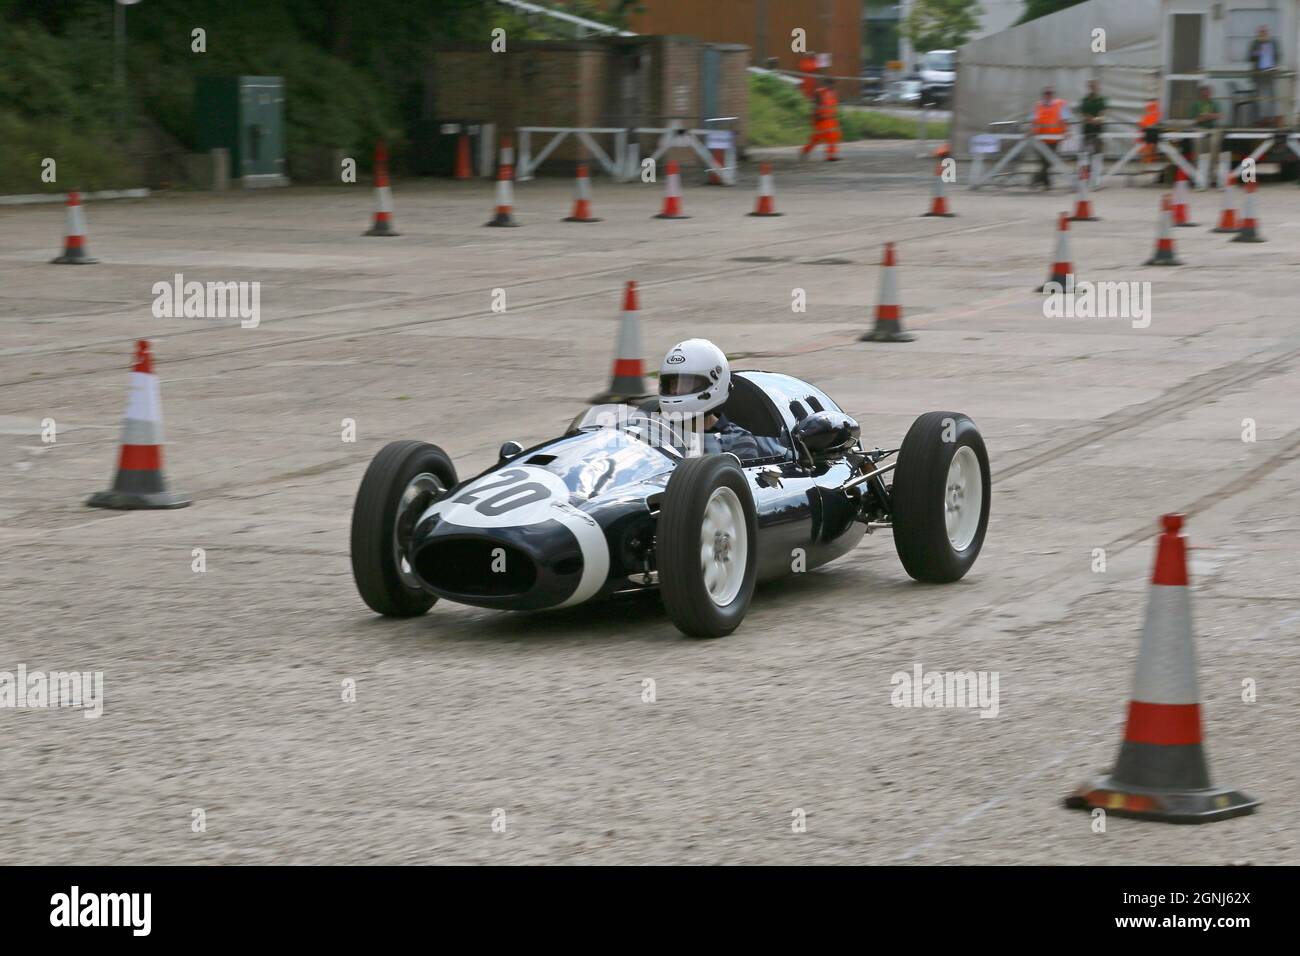 Cooper T45 (1958), Stirling Moss Tribute, 12 septembre 2021, Brooklands Museum, Weybridge,Surrey, Angleterre, Royaume-Uni, Europe Banque D'Images